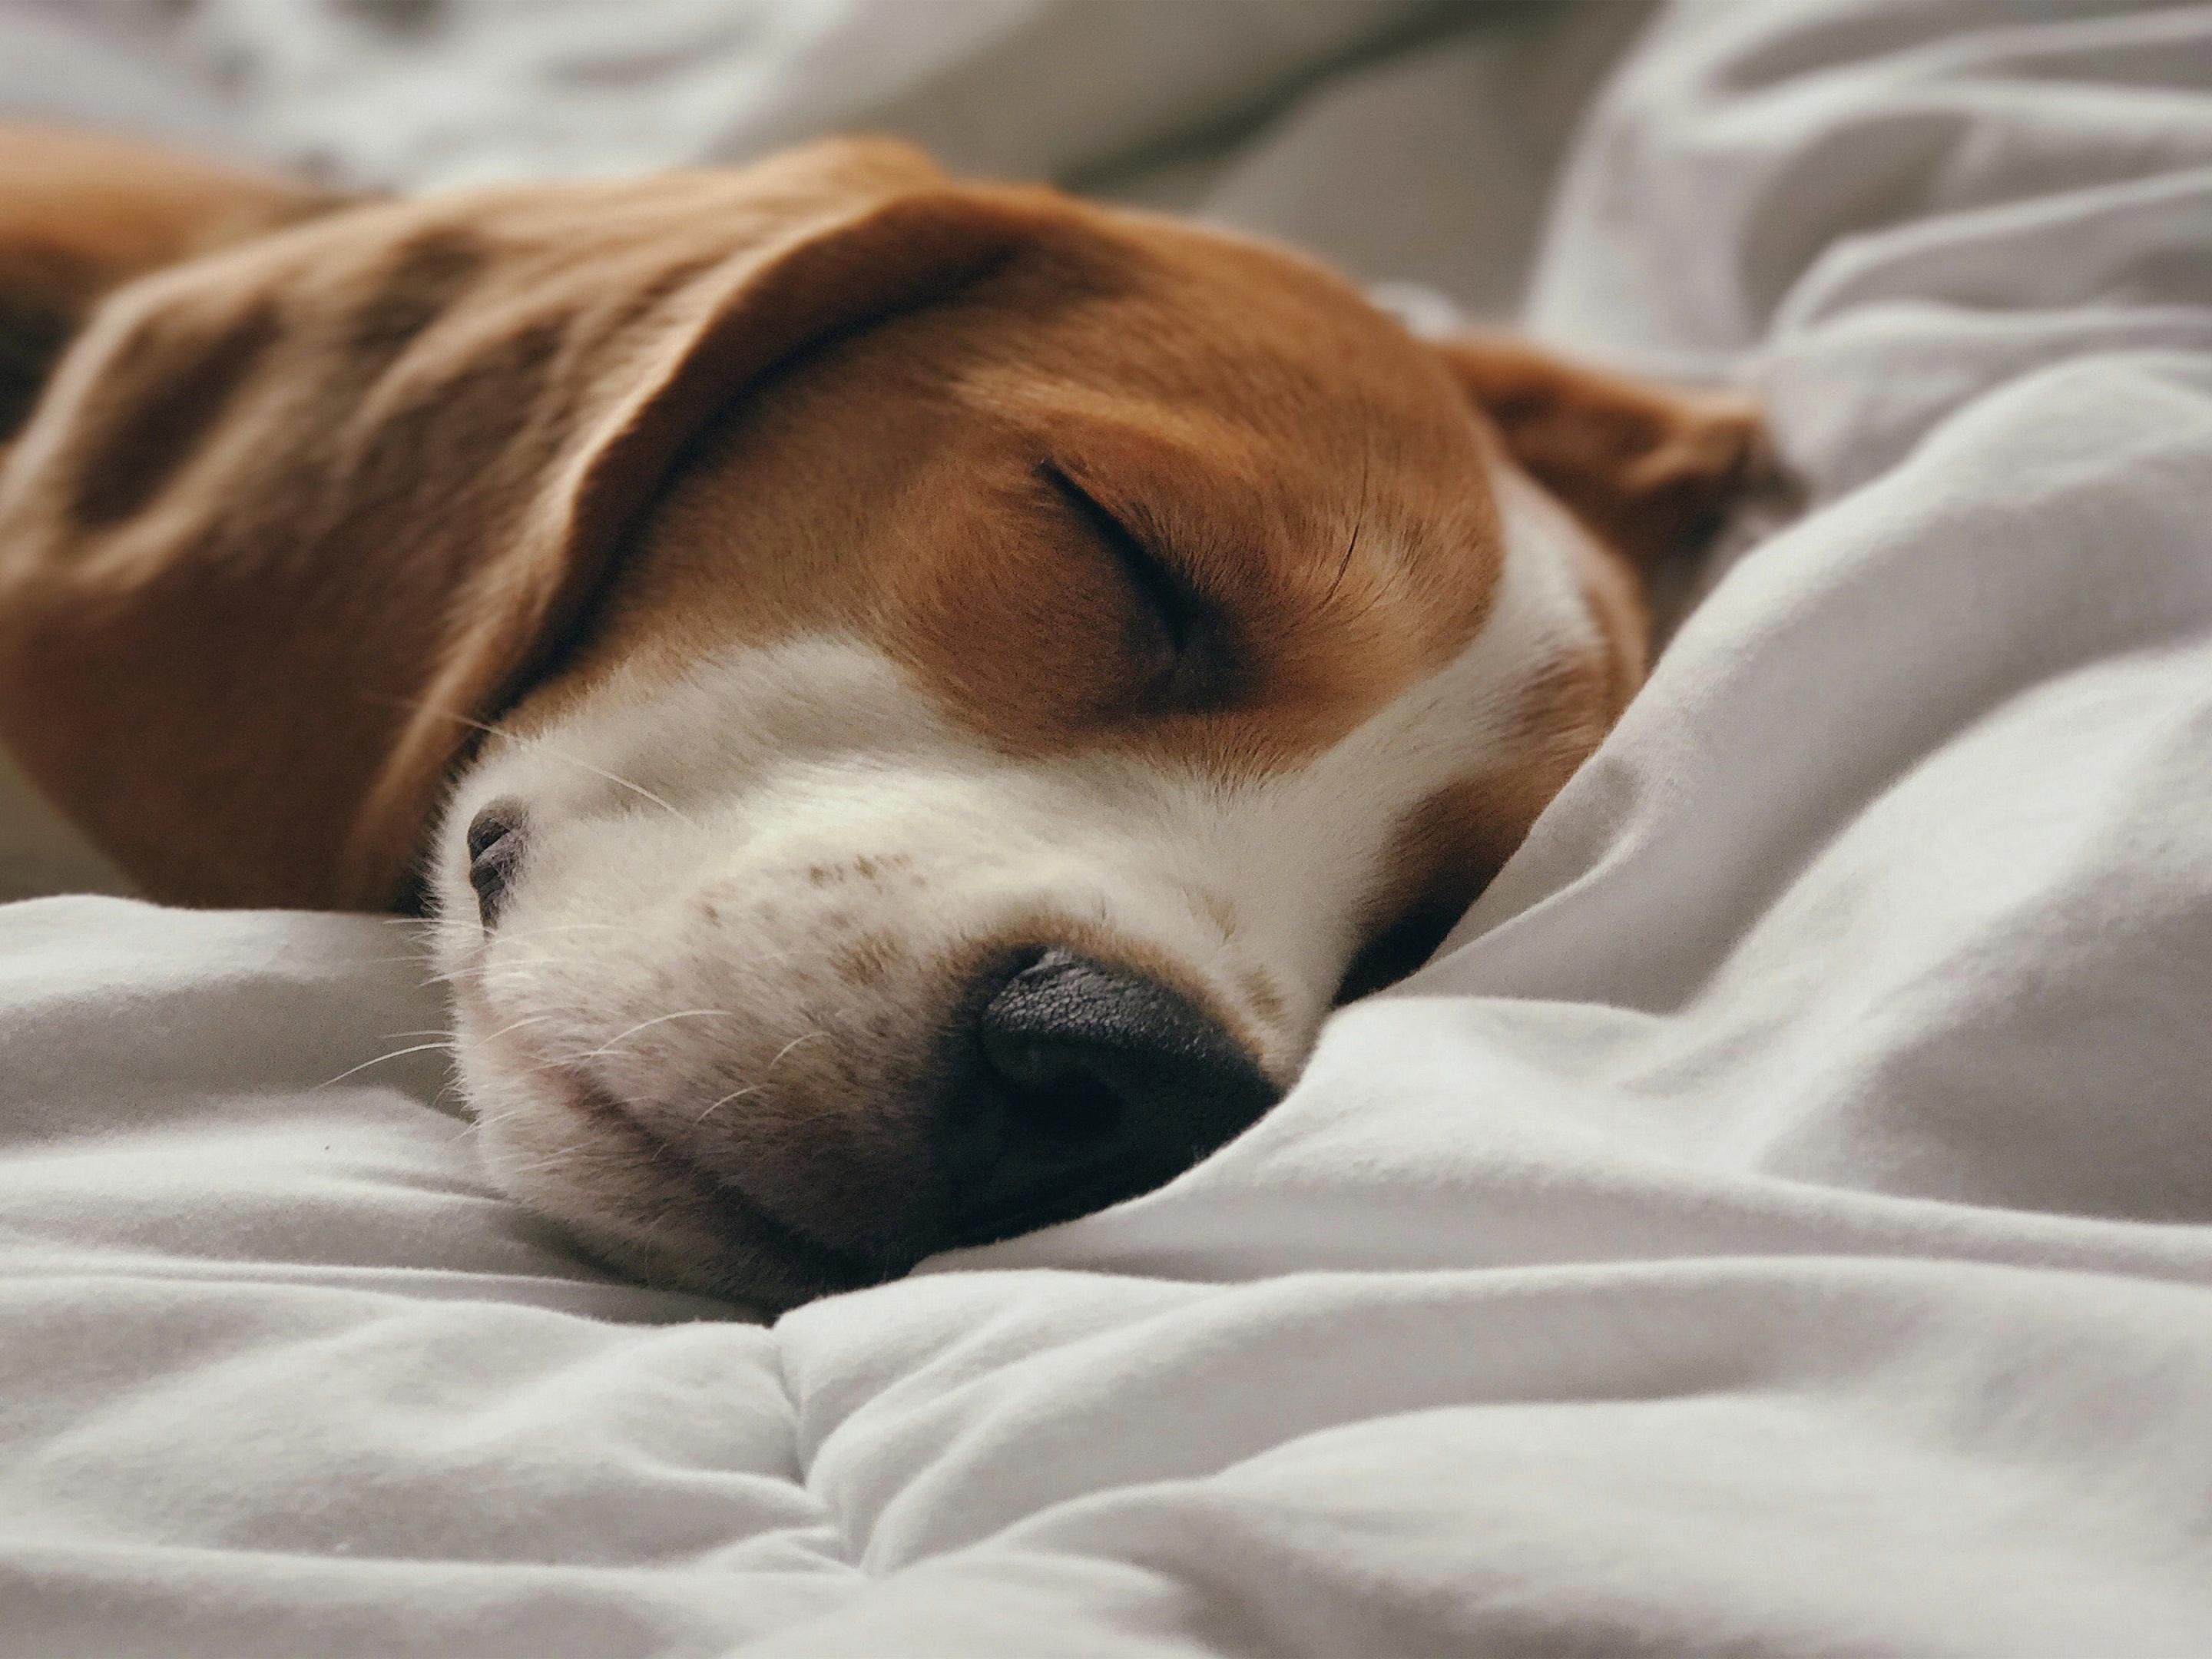 You don’t have to leave your furry friends behind when you stay with us. Dogs and cats are welcome at our hotel with a per-stay fee of $100 for up to two pets. Call ahead to learn more about our pet policy and get ready for a fur-bulous trip to Alpharetta.